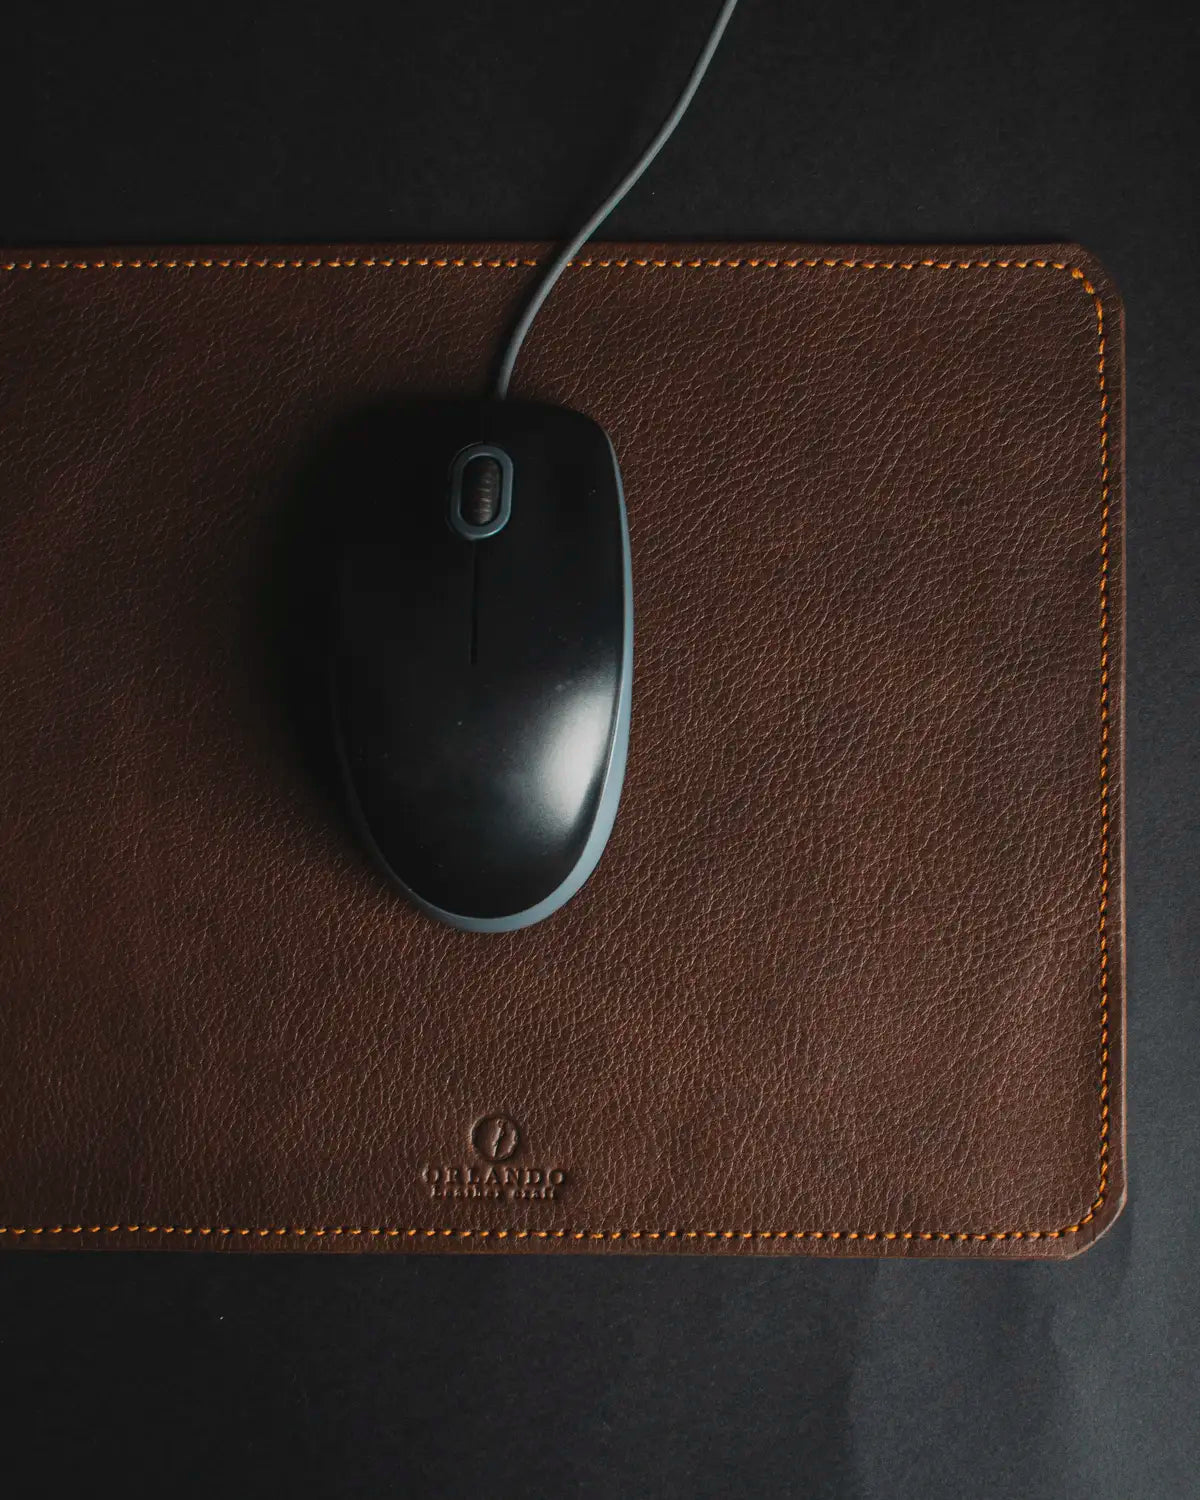 Mouse pad - Brown